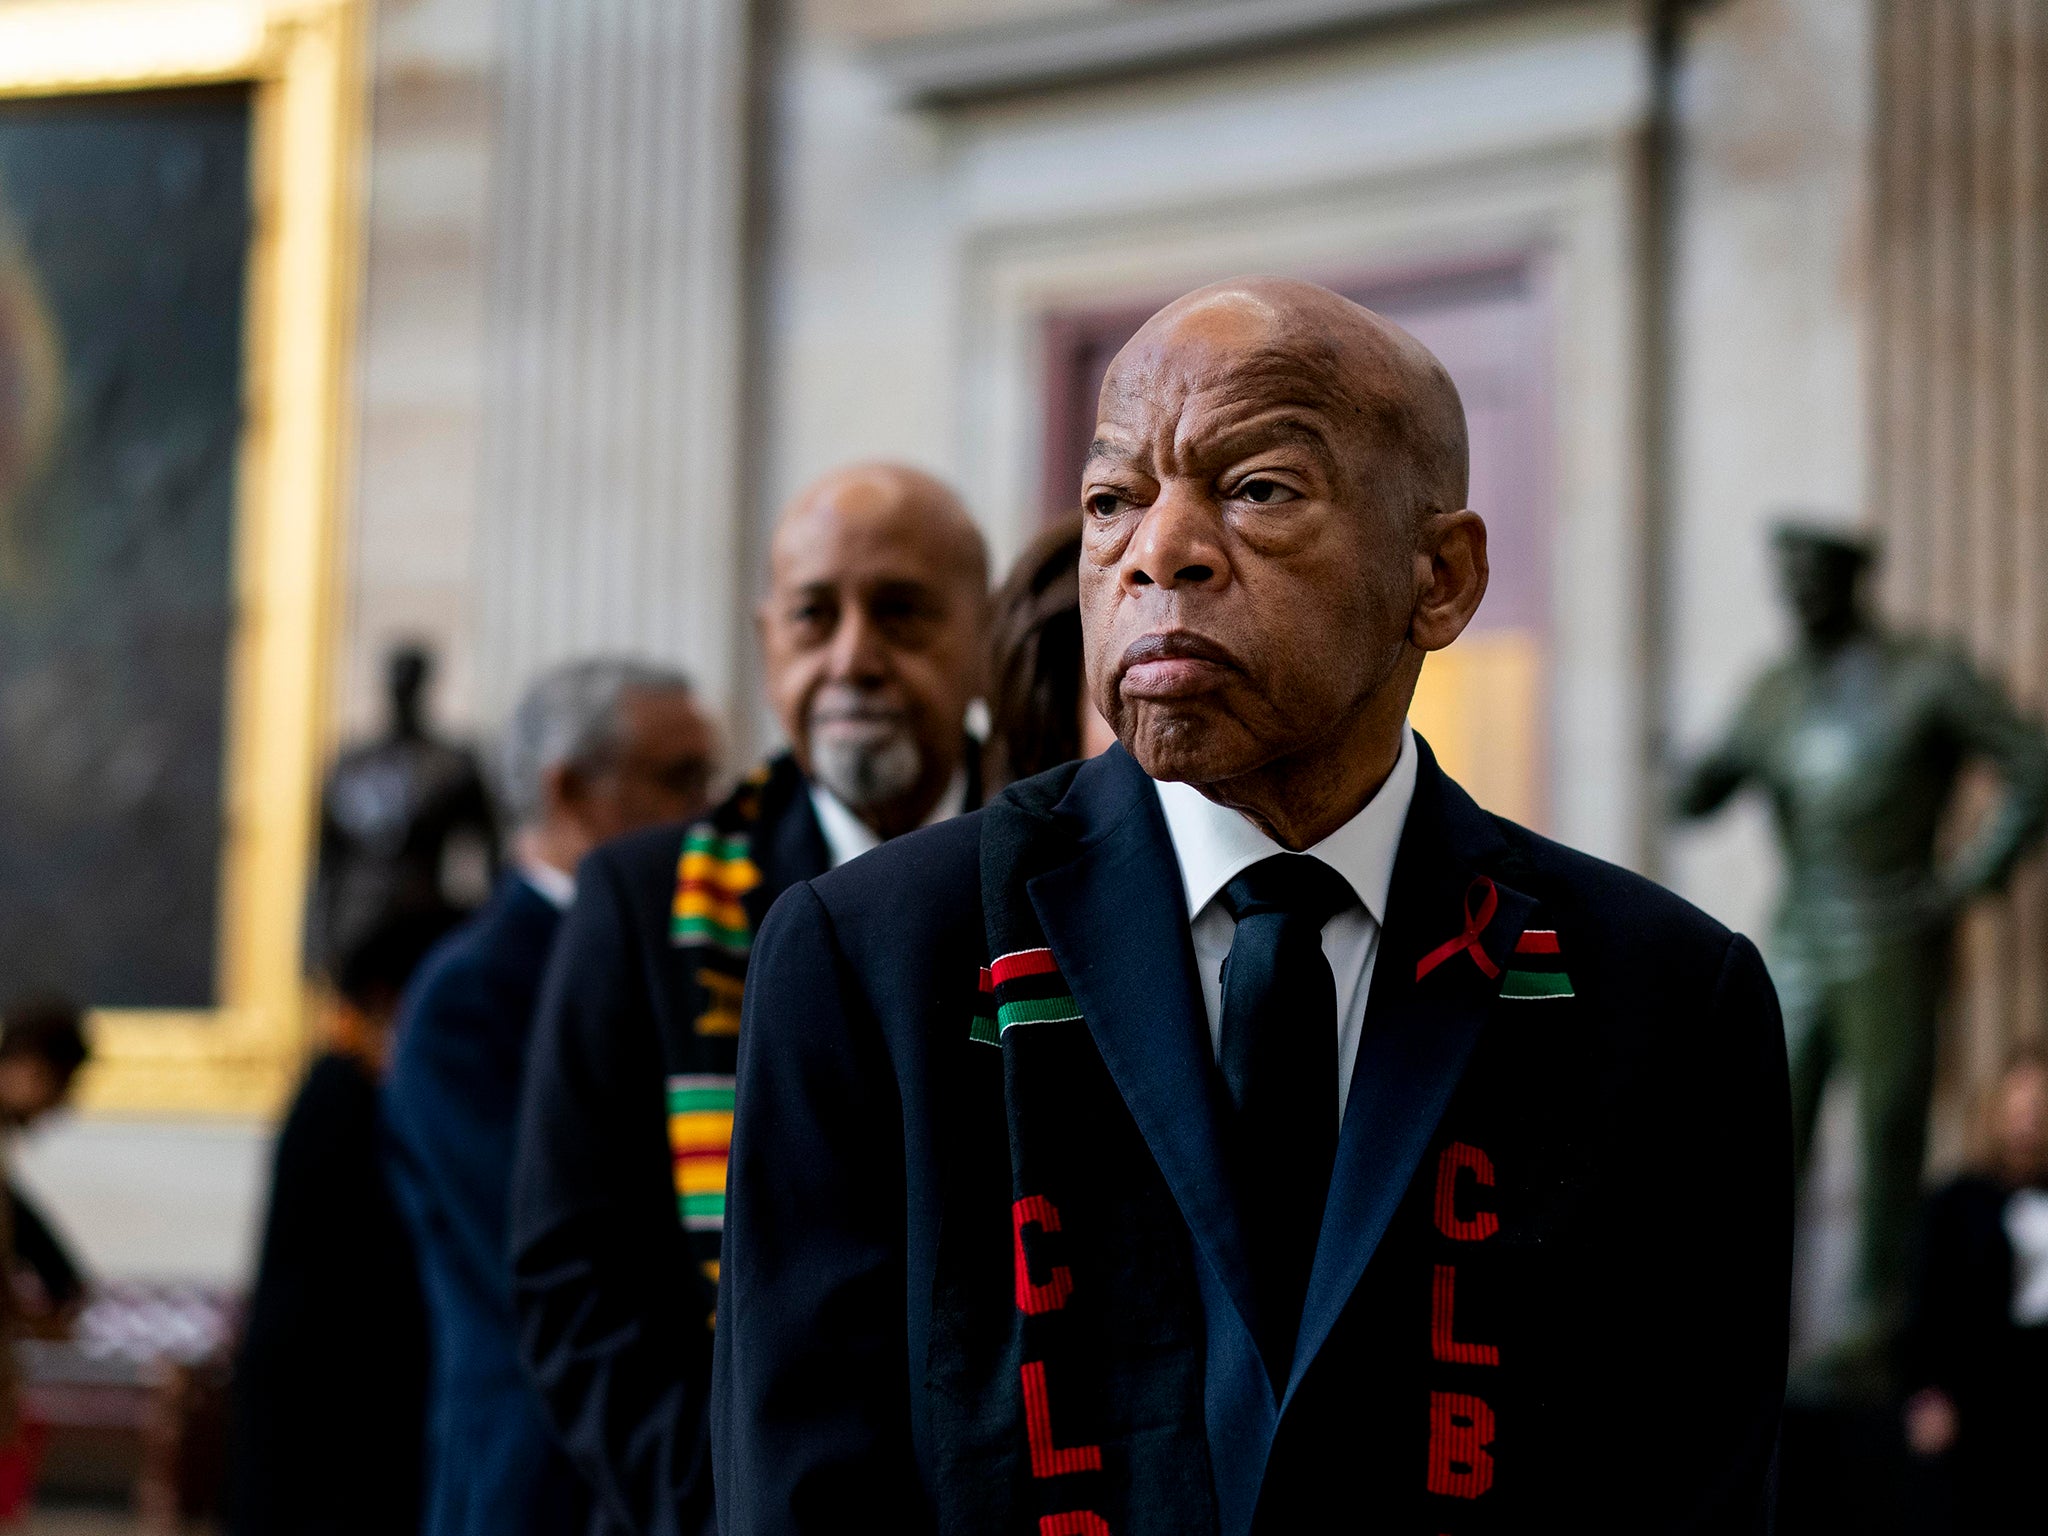 Lewis in October as he paid his respects to Representative Elijah Cummings in Washington, DC